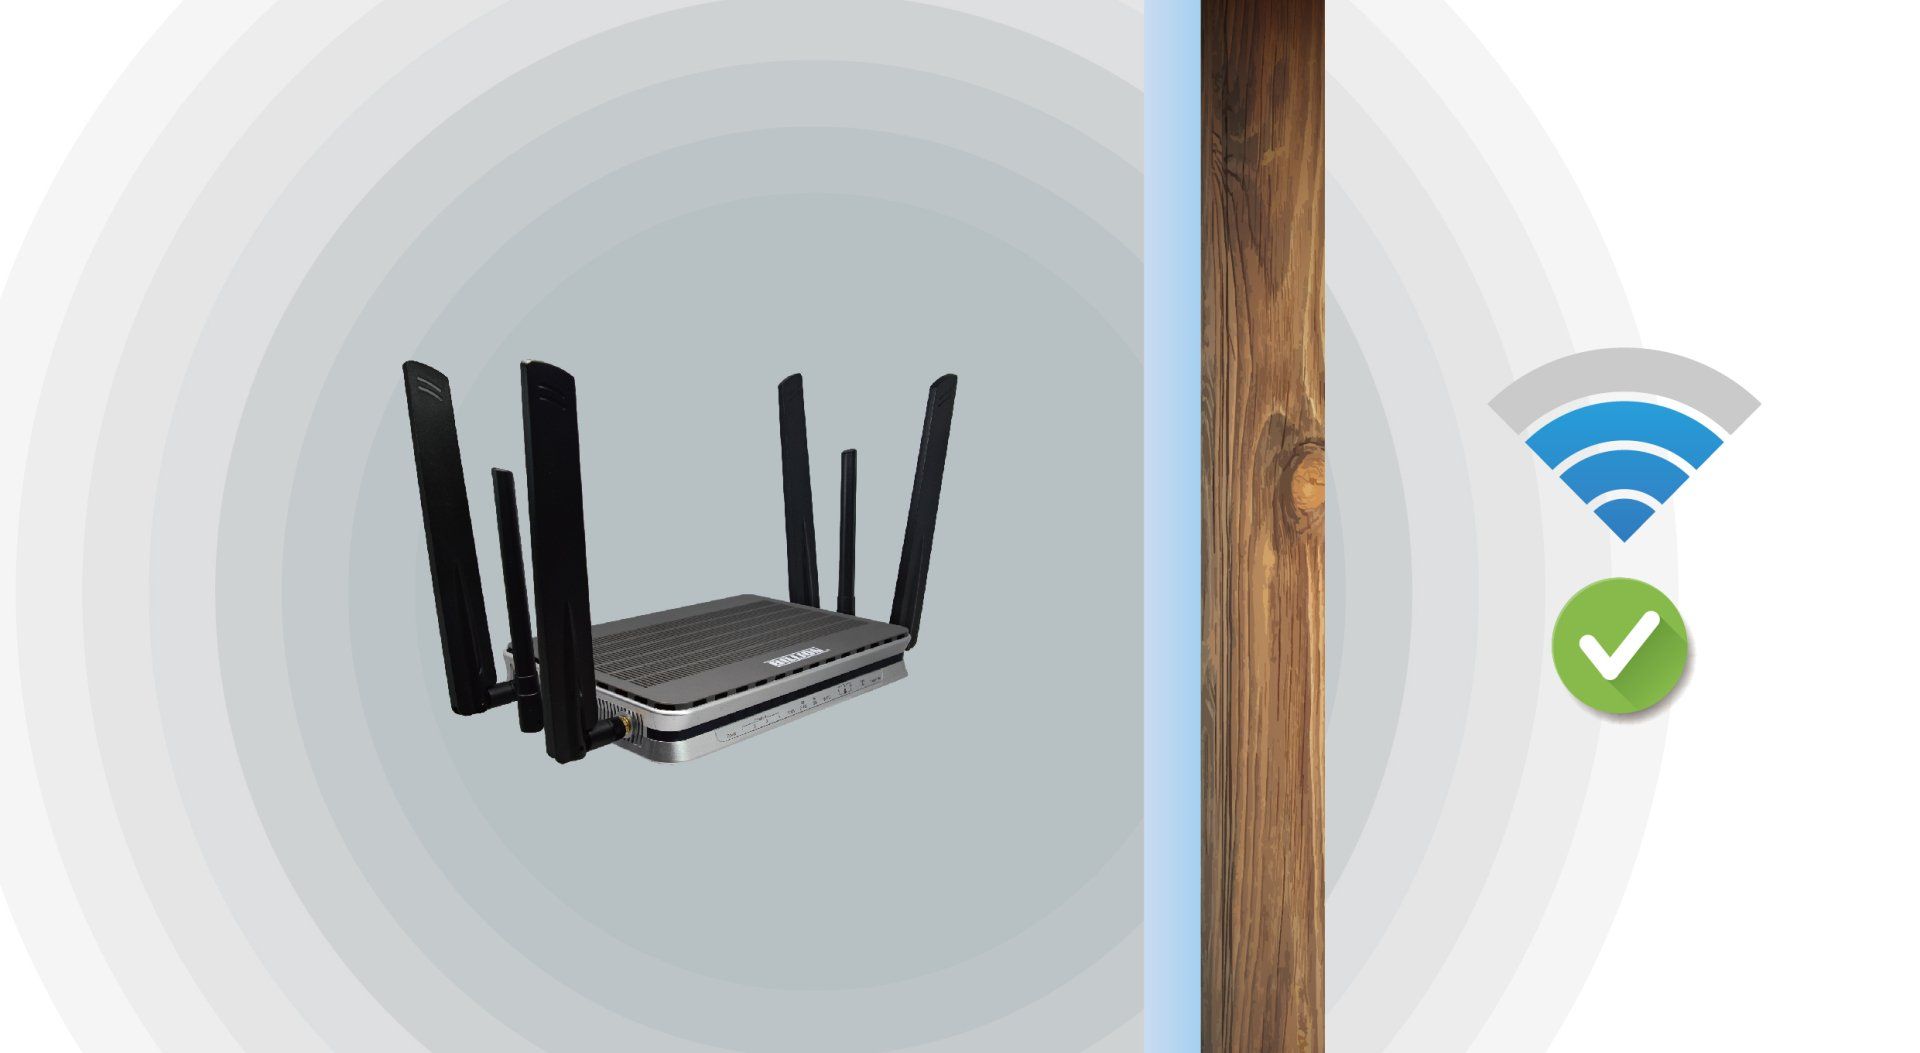 Wi-Fi can penetrate glass, wood, etc. but the signal will be weakened